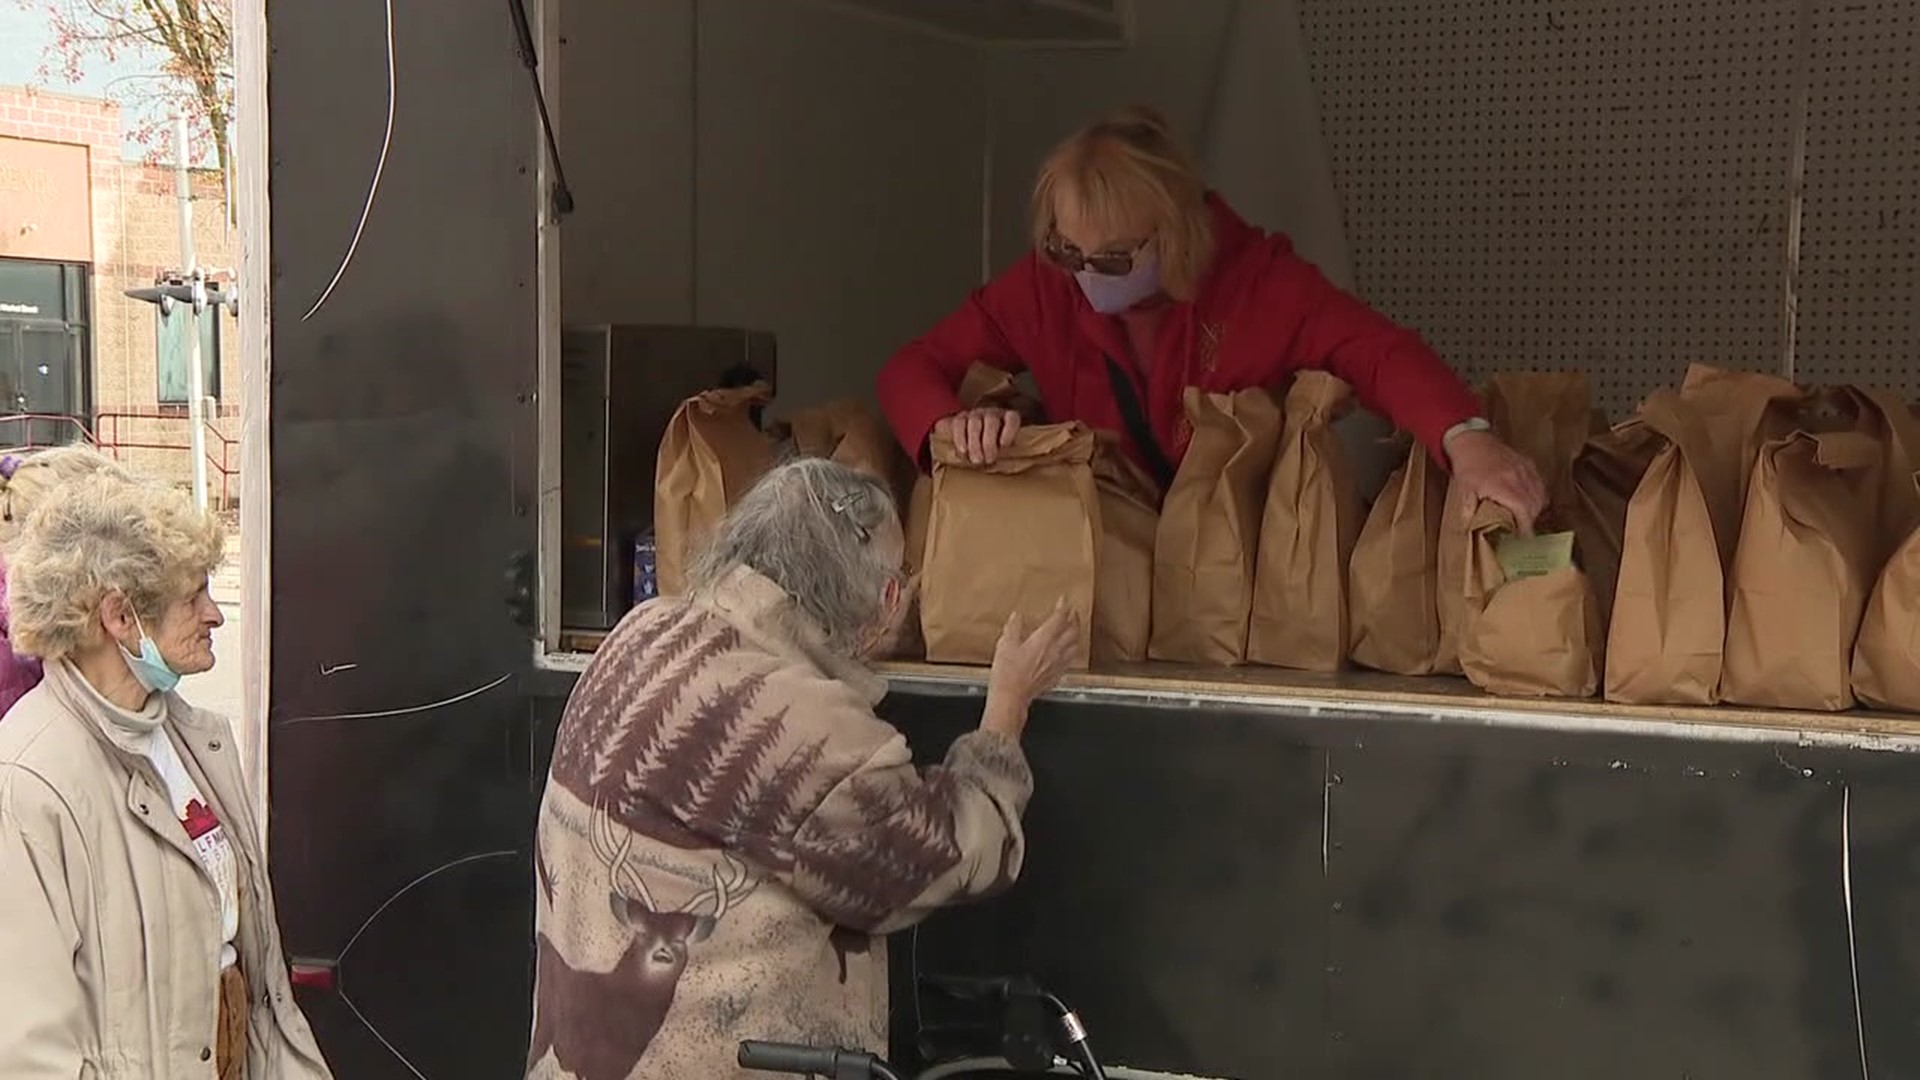 Volunteers are needed to prepare and serve brown bag lunches on Thanksgiving Day. Newswatch 16's Nikki Krize shows us how you can help.